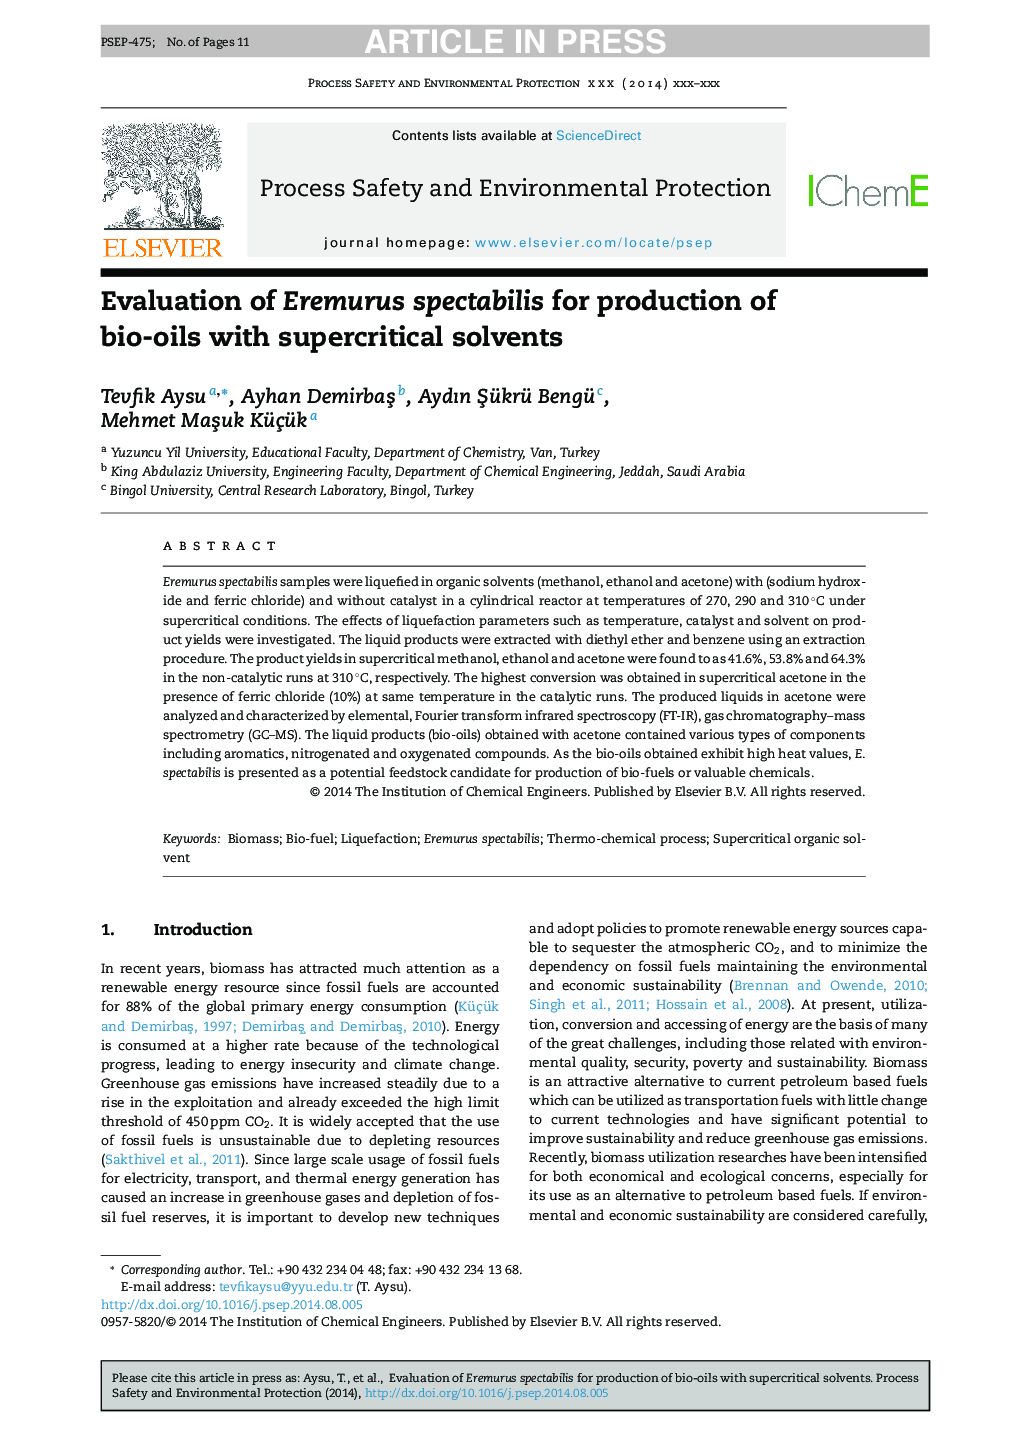 Evaluation of Eremurus spectabilis for production of bio-oils with supercritical solvents